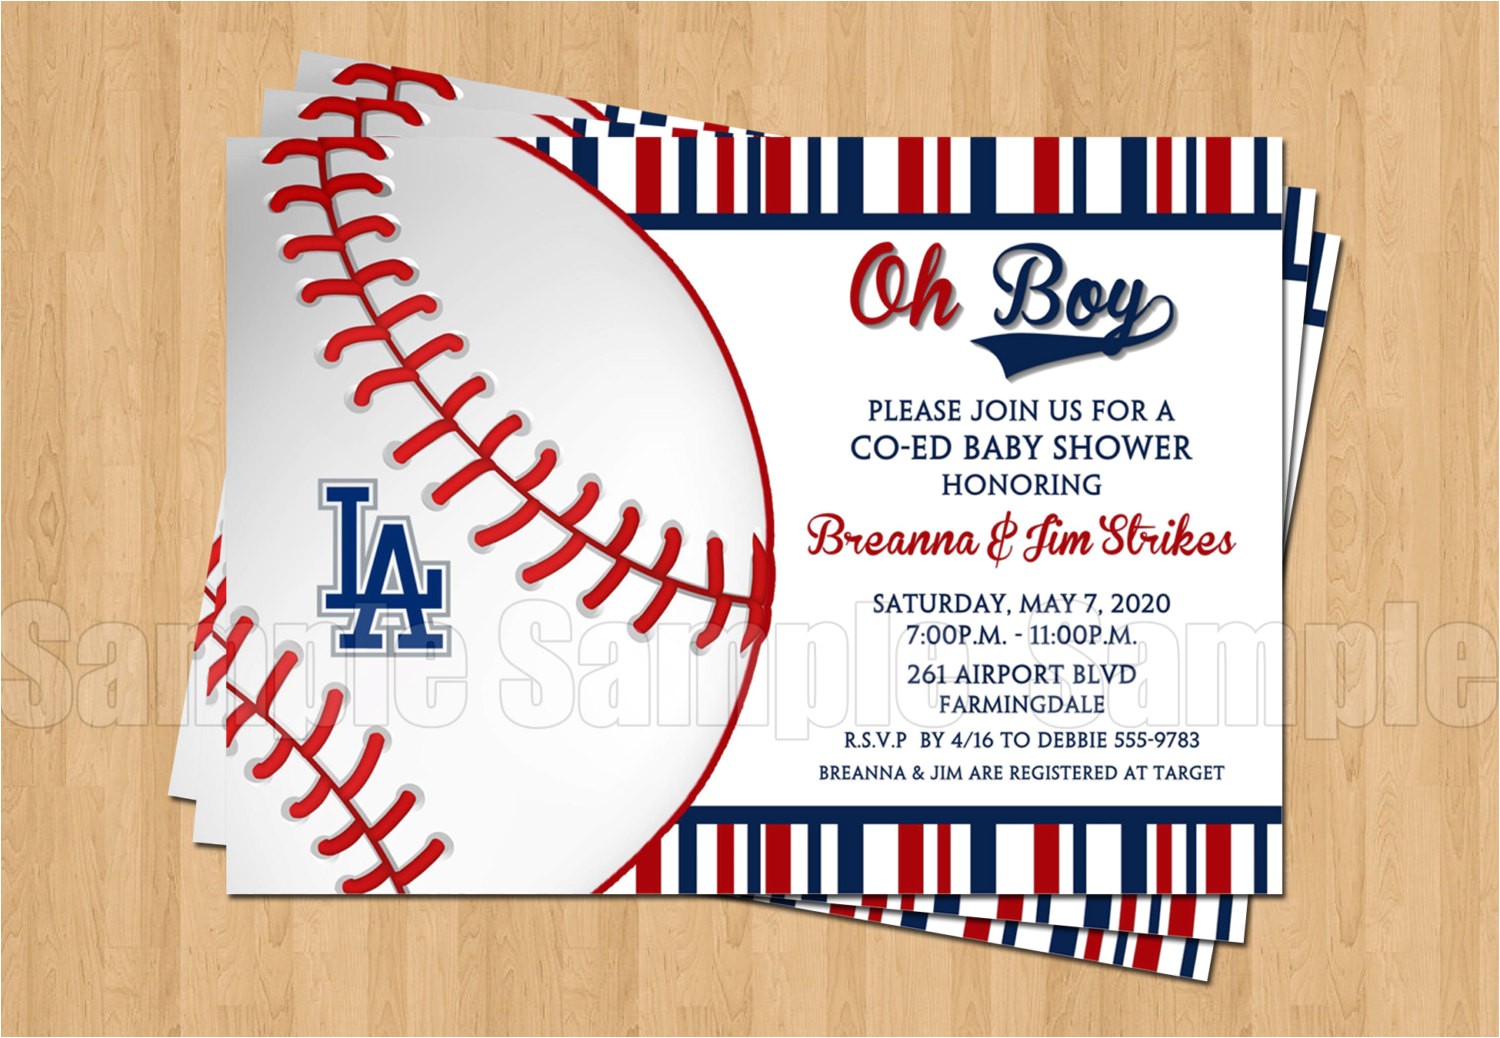 Dodger Baby Shower Invitations Any Team Baseball Dodgers Padres Red sox Angels Baby Boy